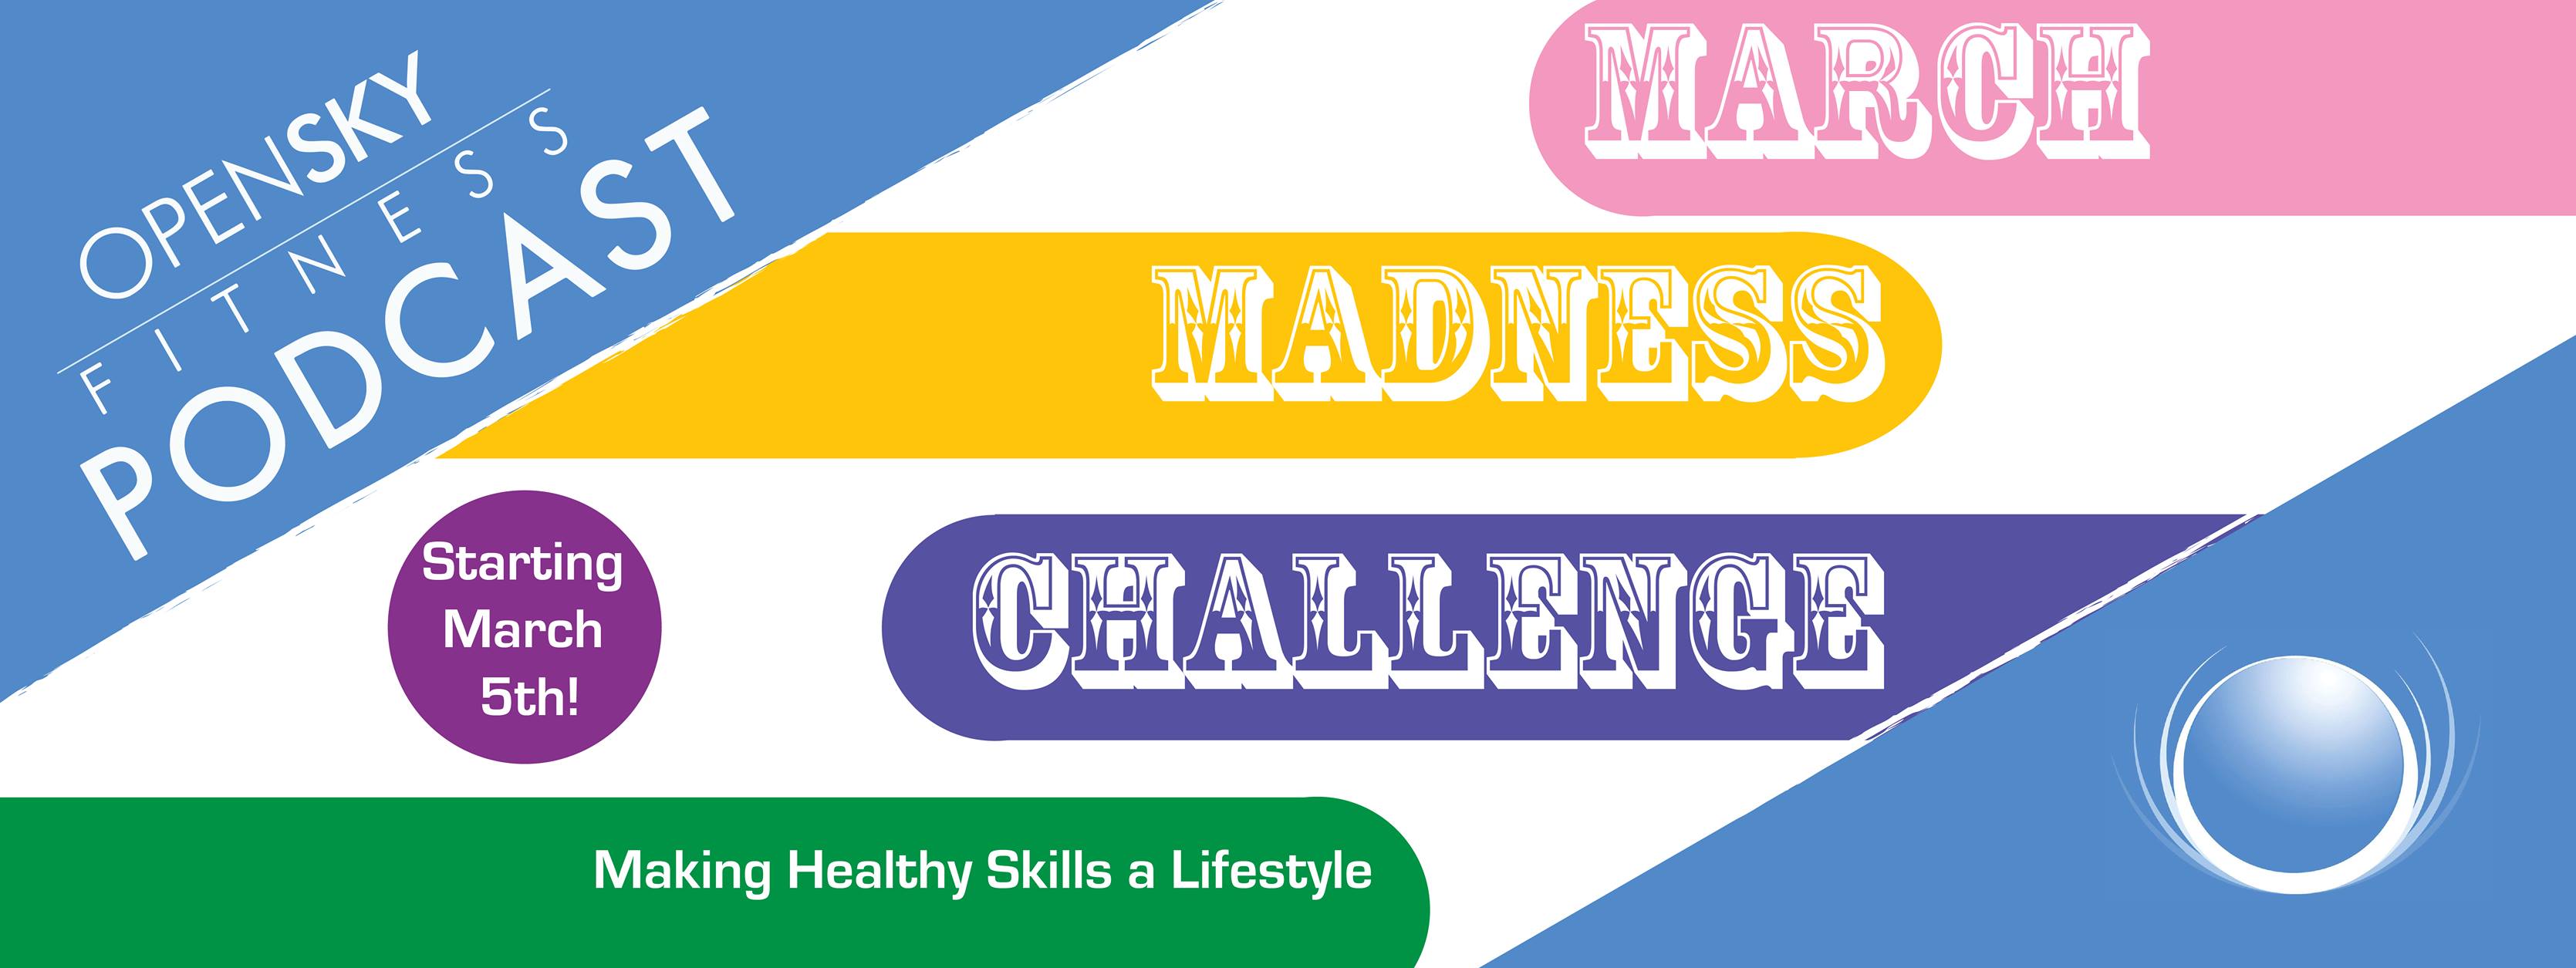 Open Sky FItness Podcast March Madness Challenge 2017